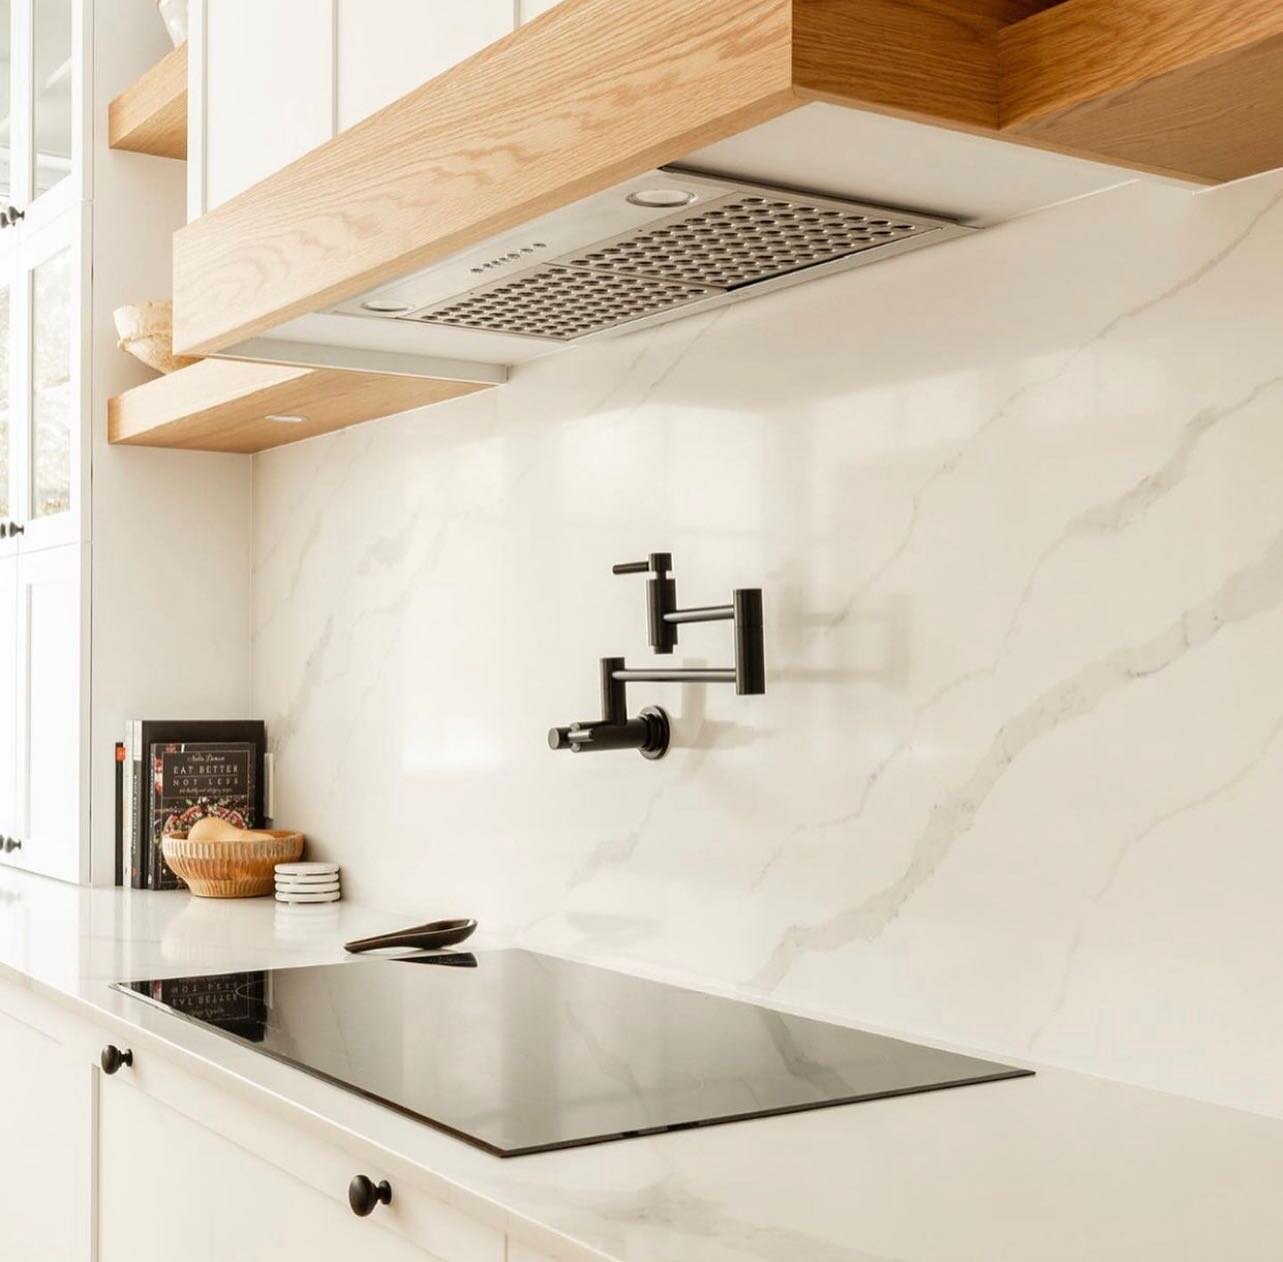 Designing a new kitchen? Don&rsquo;t forget your pot filler.